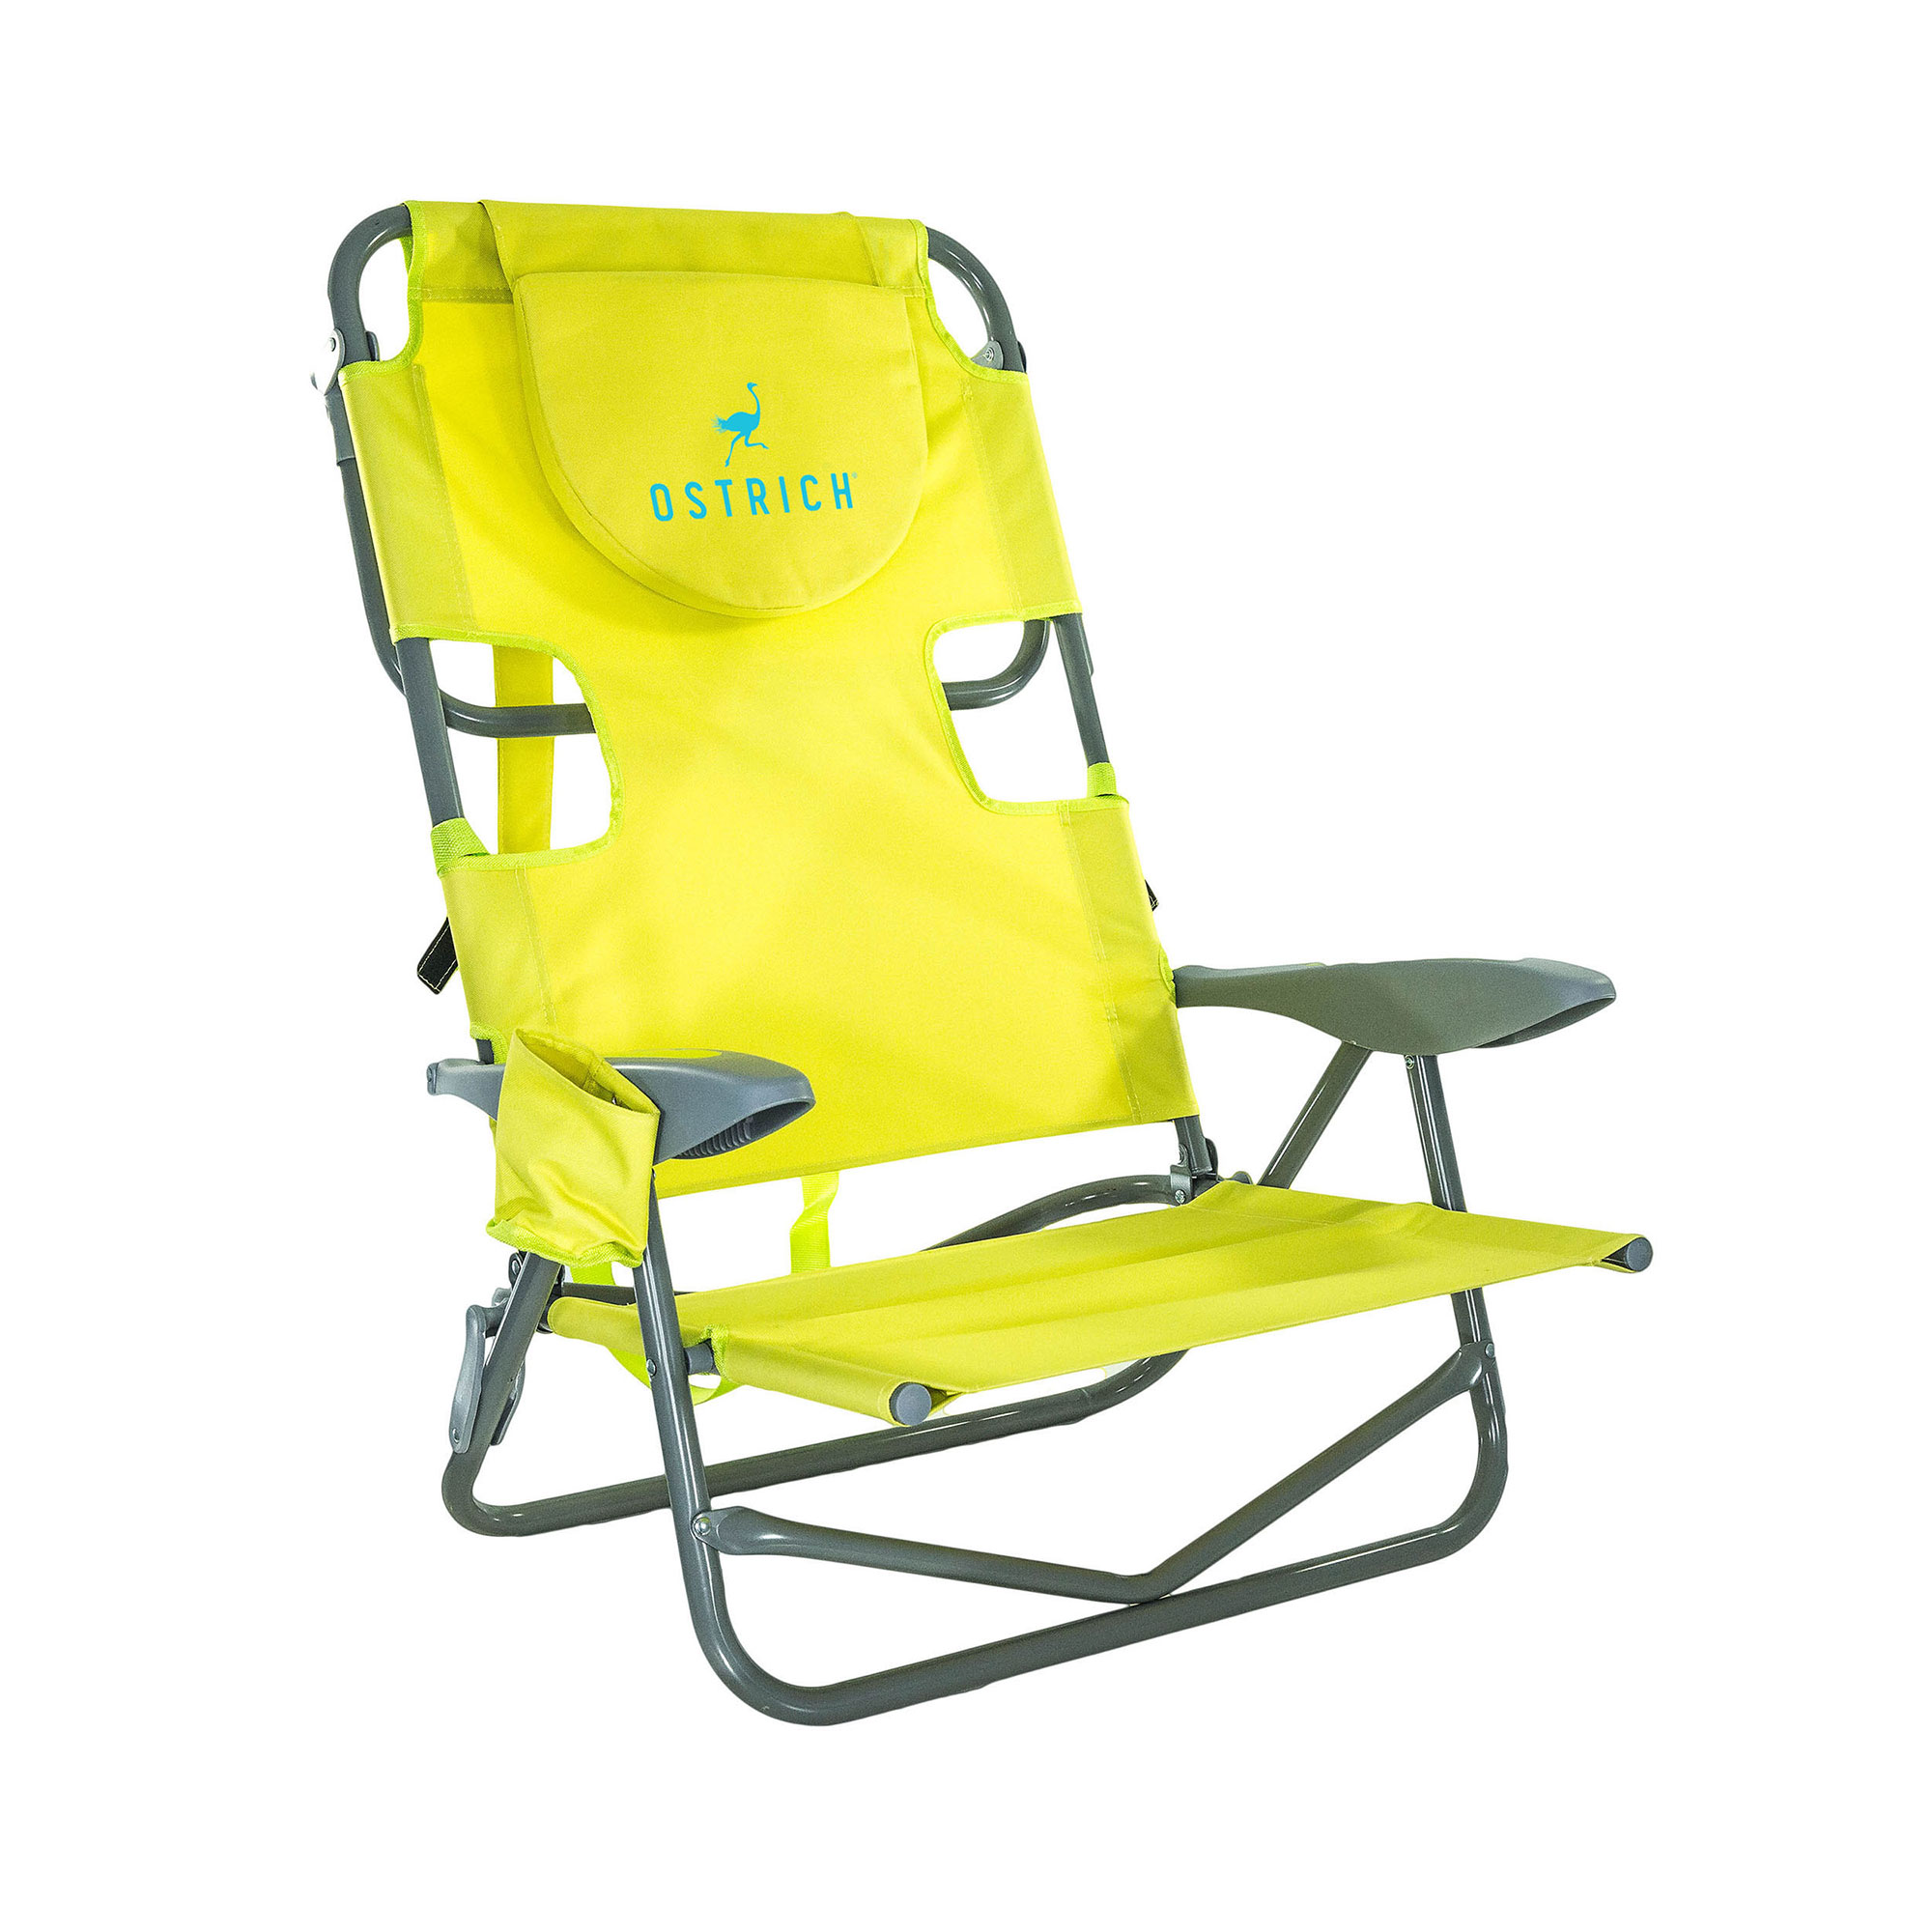 Ostrich On-Your-Back Outdoor Reclining Beach Pool Camping Chair, Green - image 1 of 9